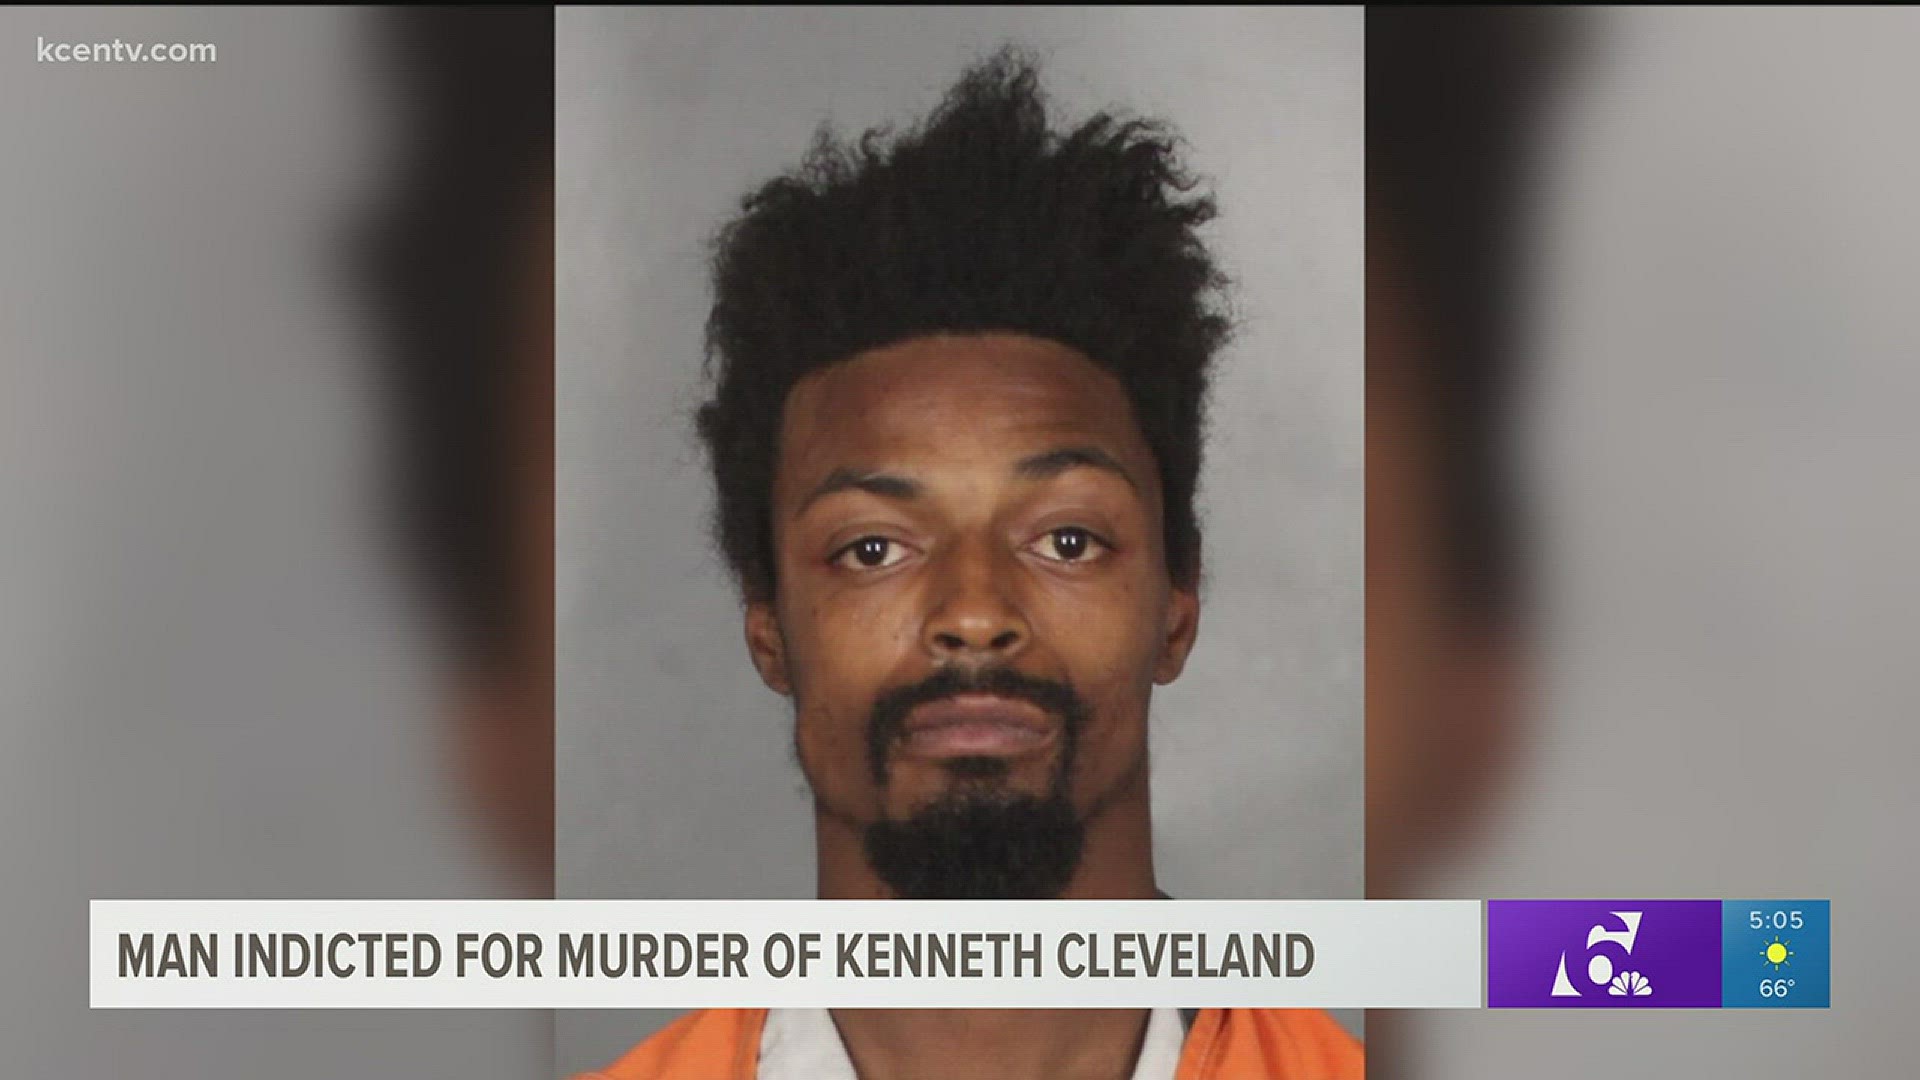 A Waco man accused of murdering local AT&T worker Kenneth Cleveland is now indicted.